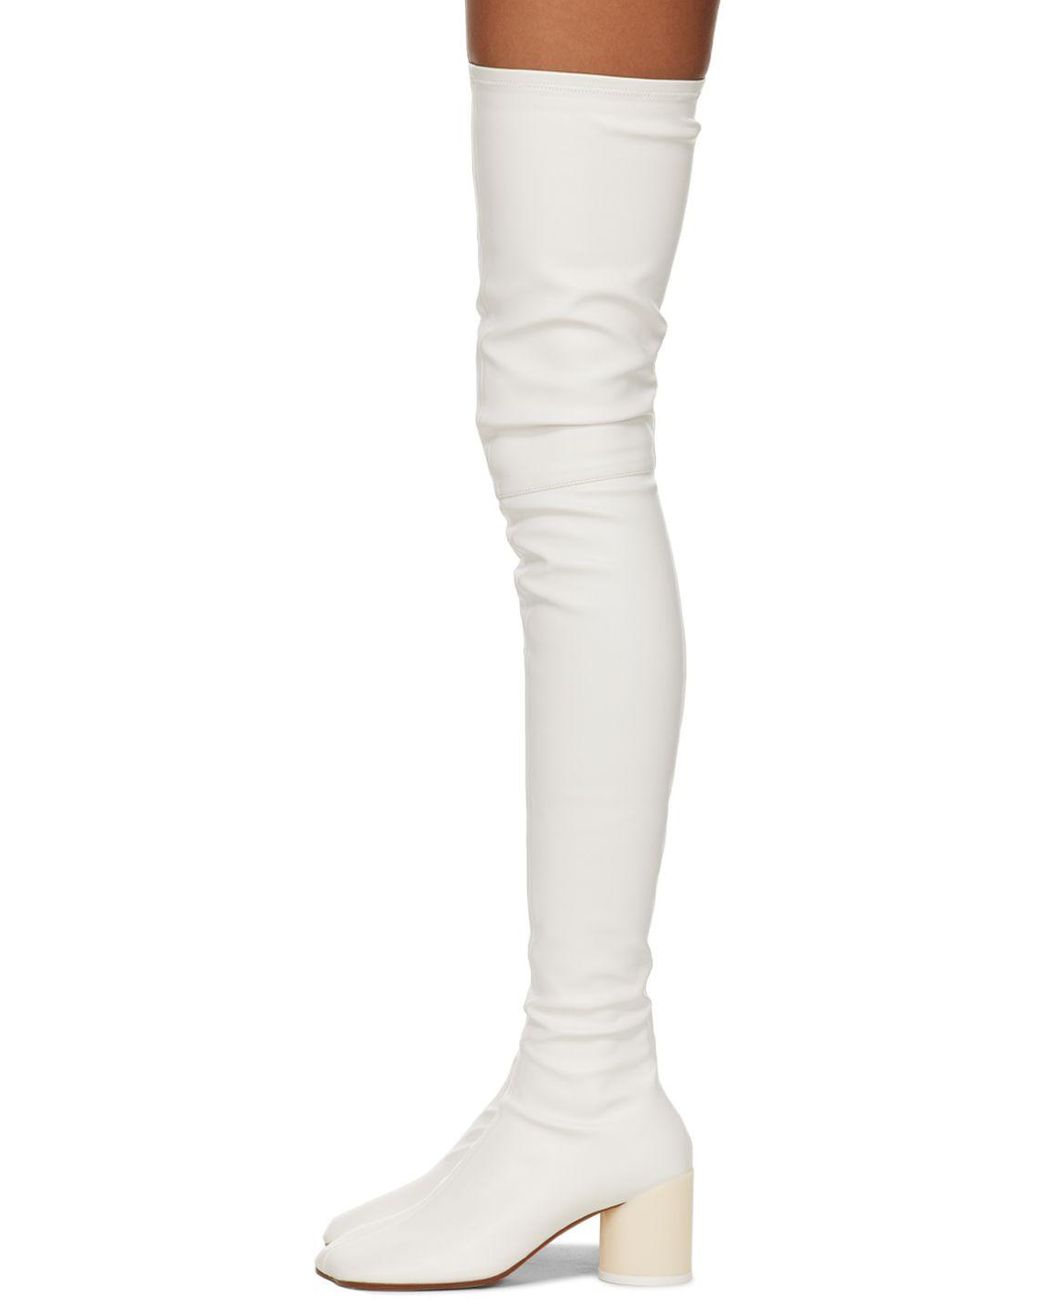 Womens Shoes Boots Over-the-knee boots MM6 by Maison Martin Margiela Faux Leather Heeled Over-the-knee Boots in White 